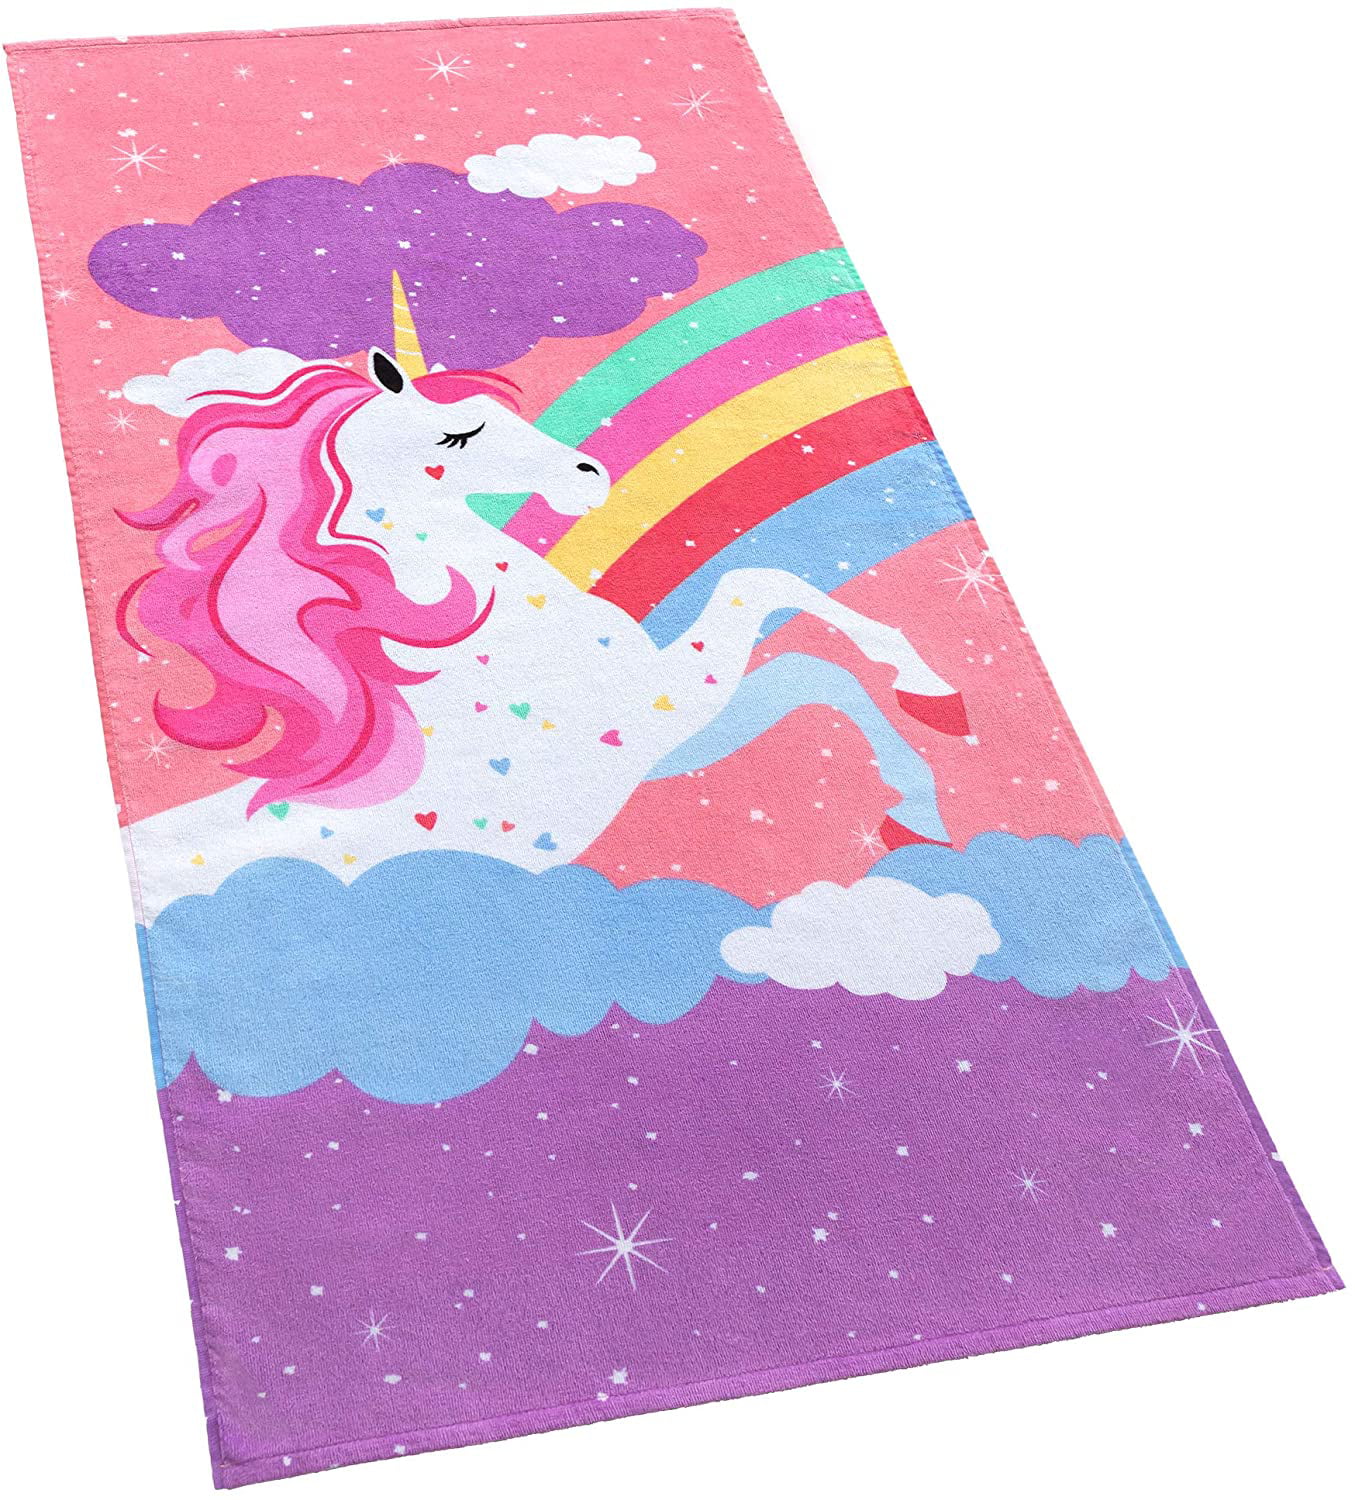 Love Unicorn and Stars Velour Beach Towel for Kids 28in x 55in 100% Cotton 